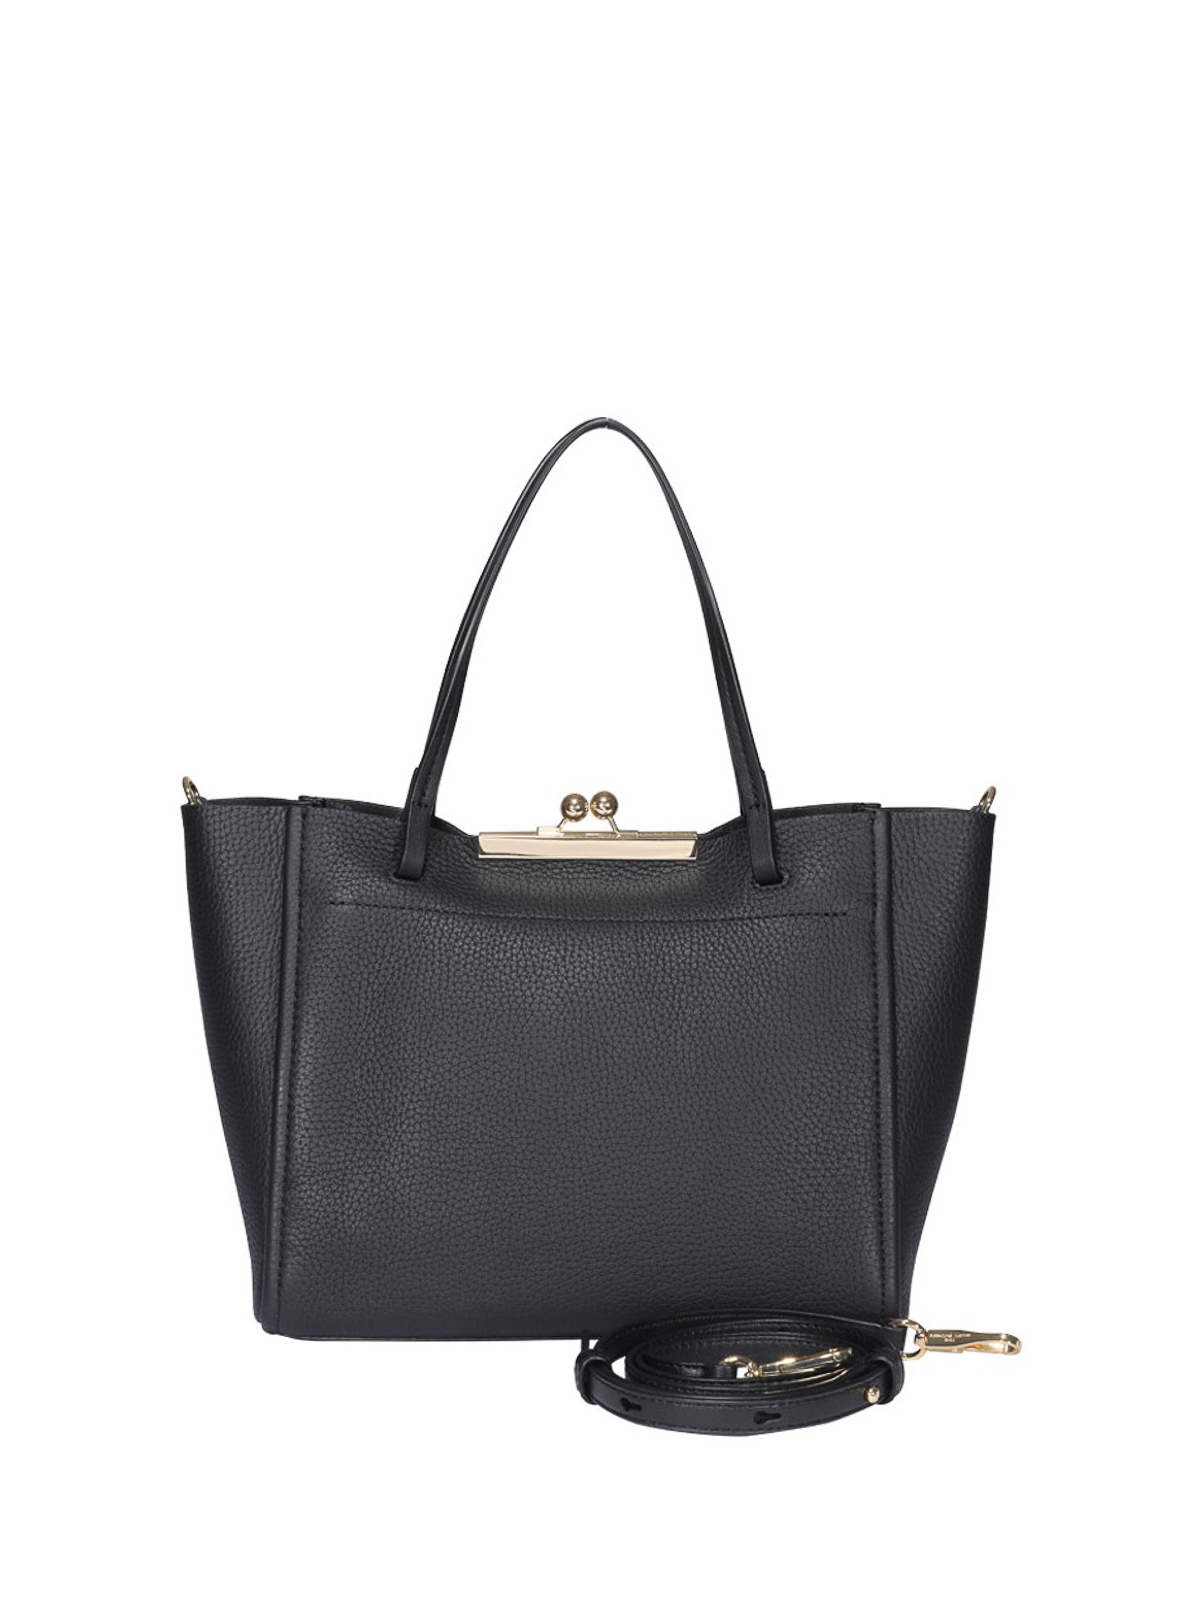 MARC JACOBS: The Mini Director hammered leather bag - Black